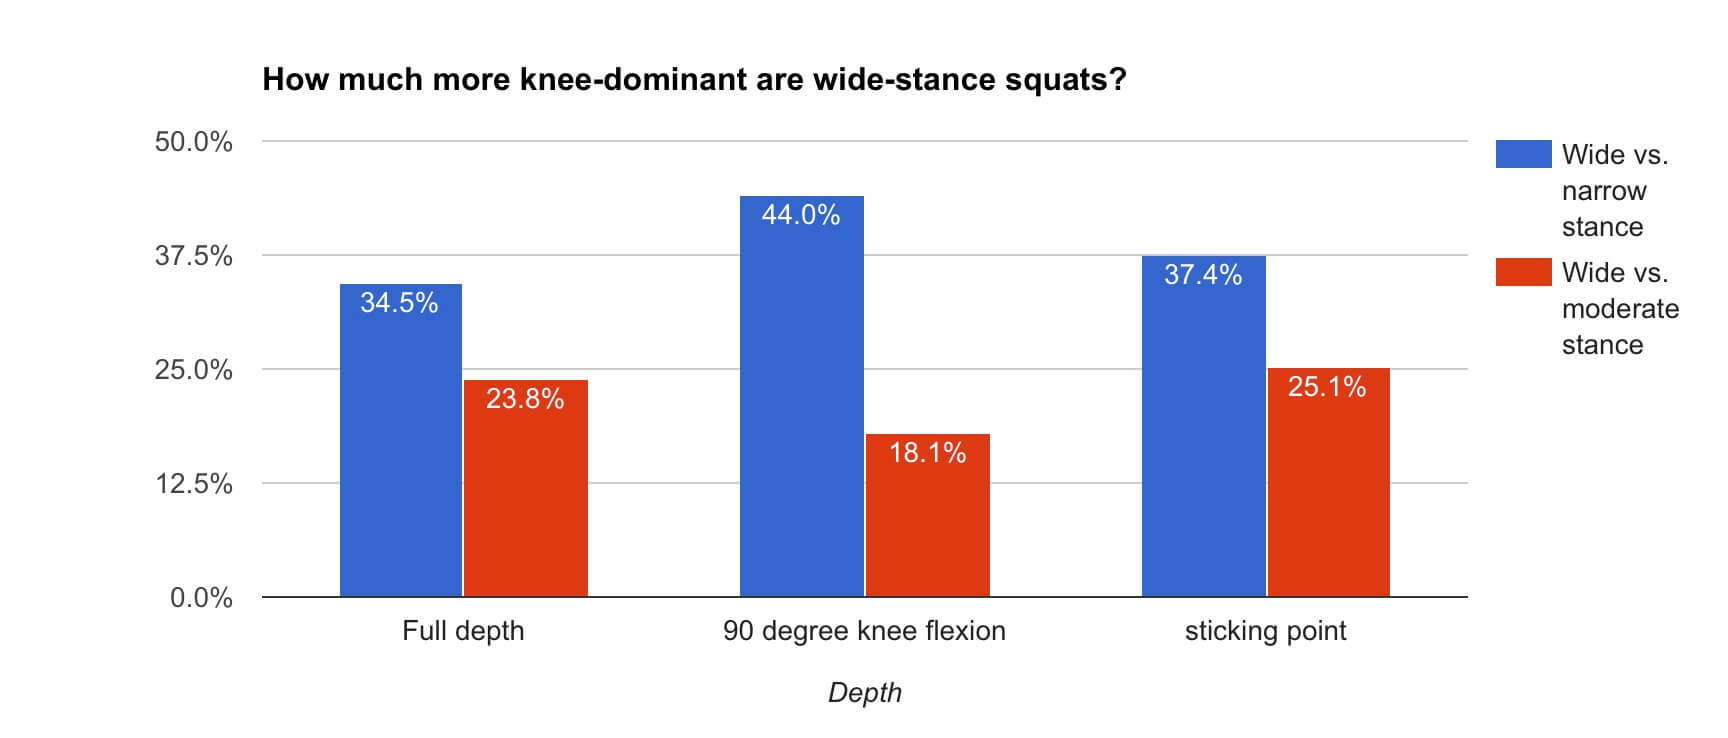 knee dominance in wide stance squat and narrow stance squat